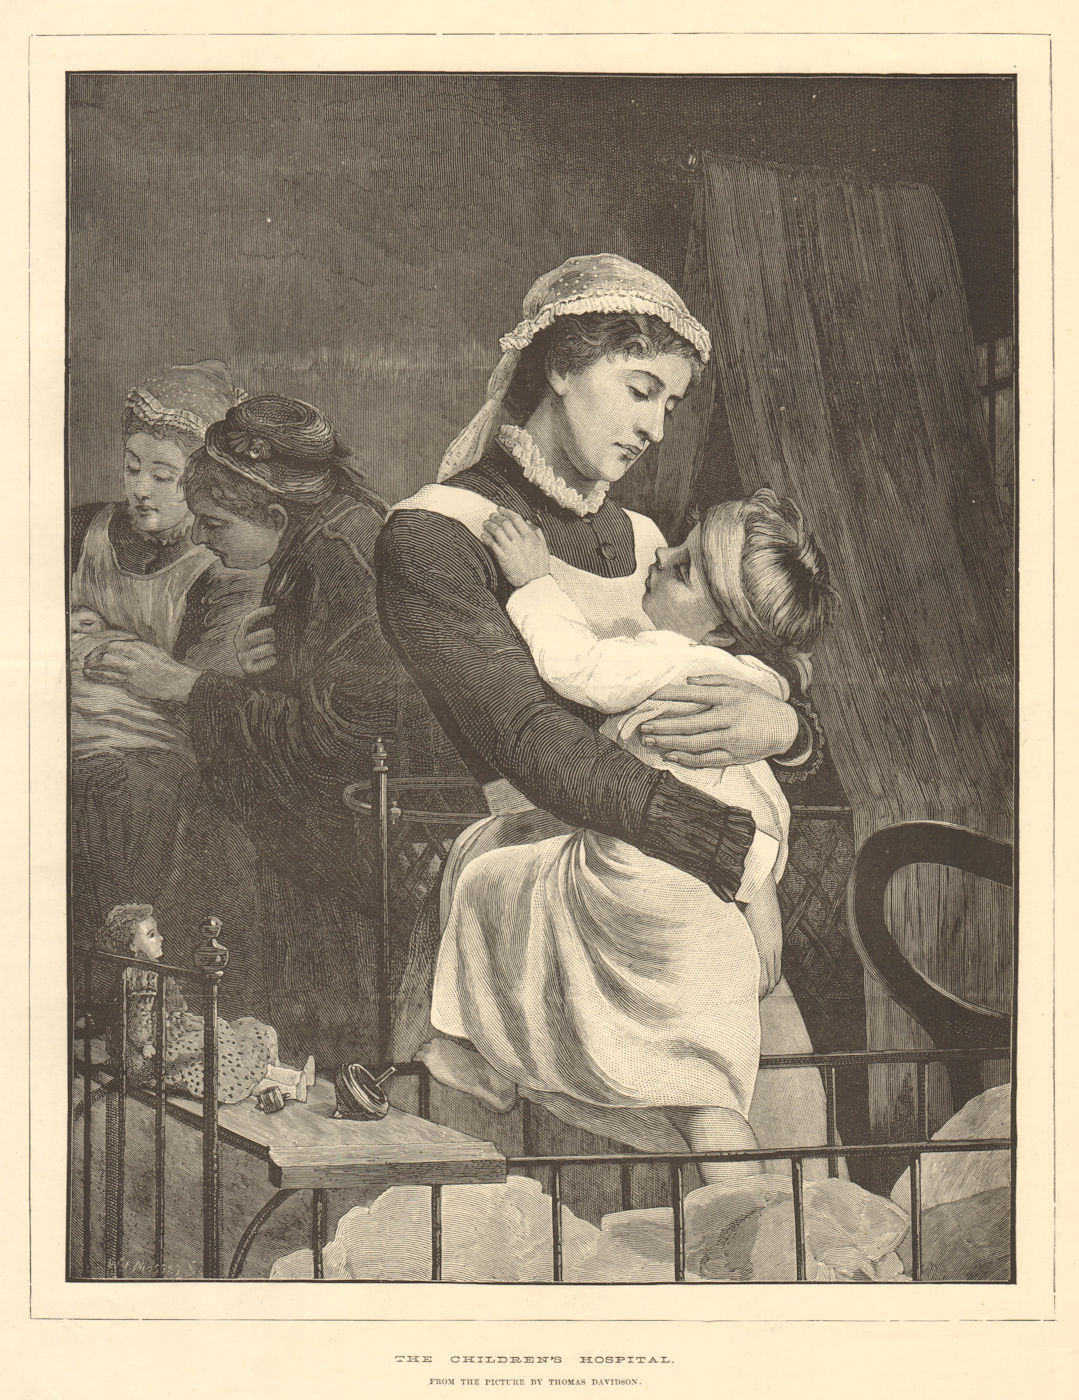 Associate Product The children's hospital, from the picture by Thomas Davidson. Medical 1882